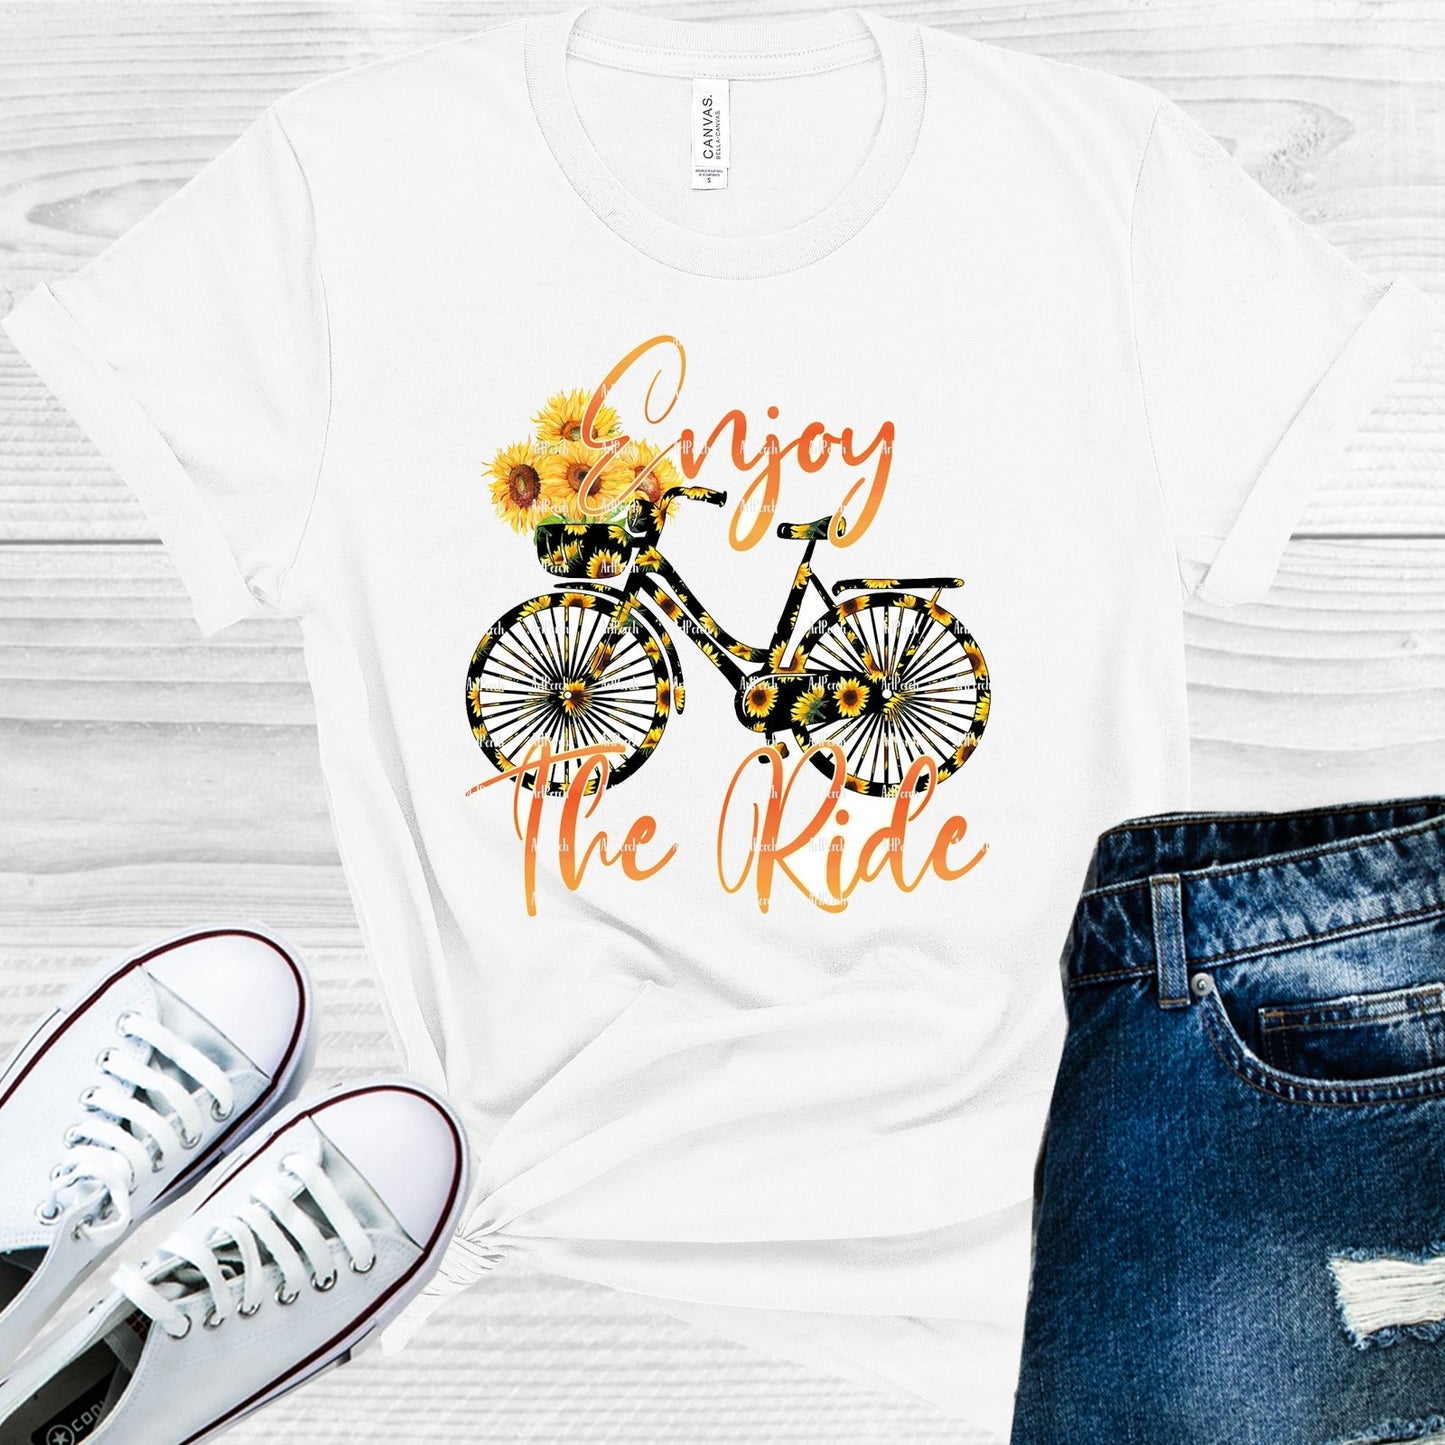 Enjoy The Ride Graphic Tee Graphic Tee